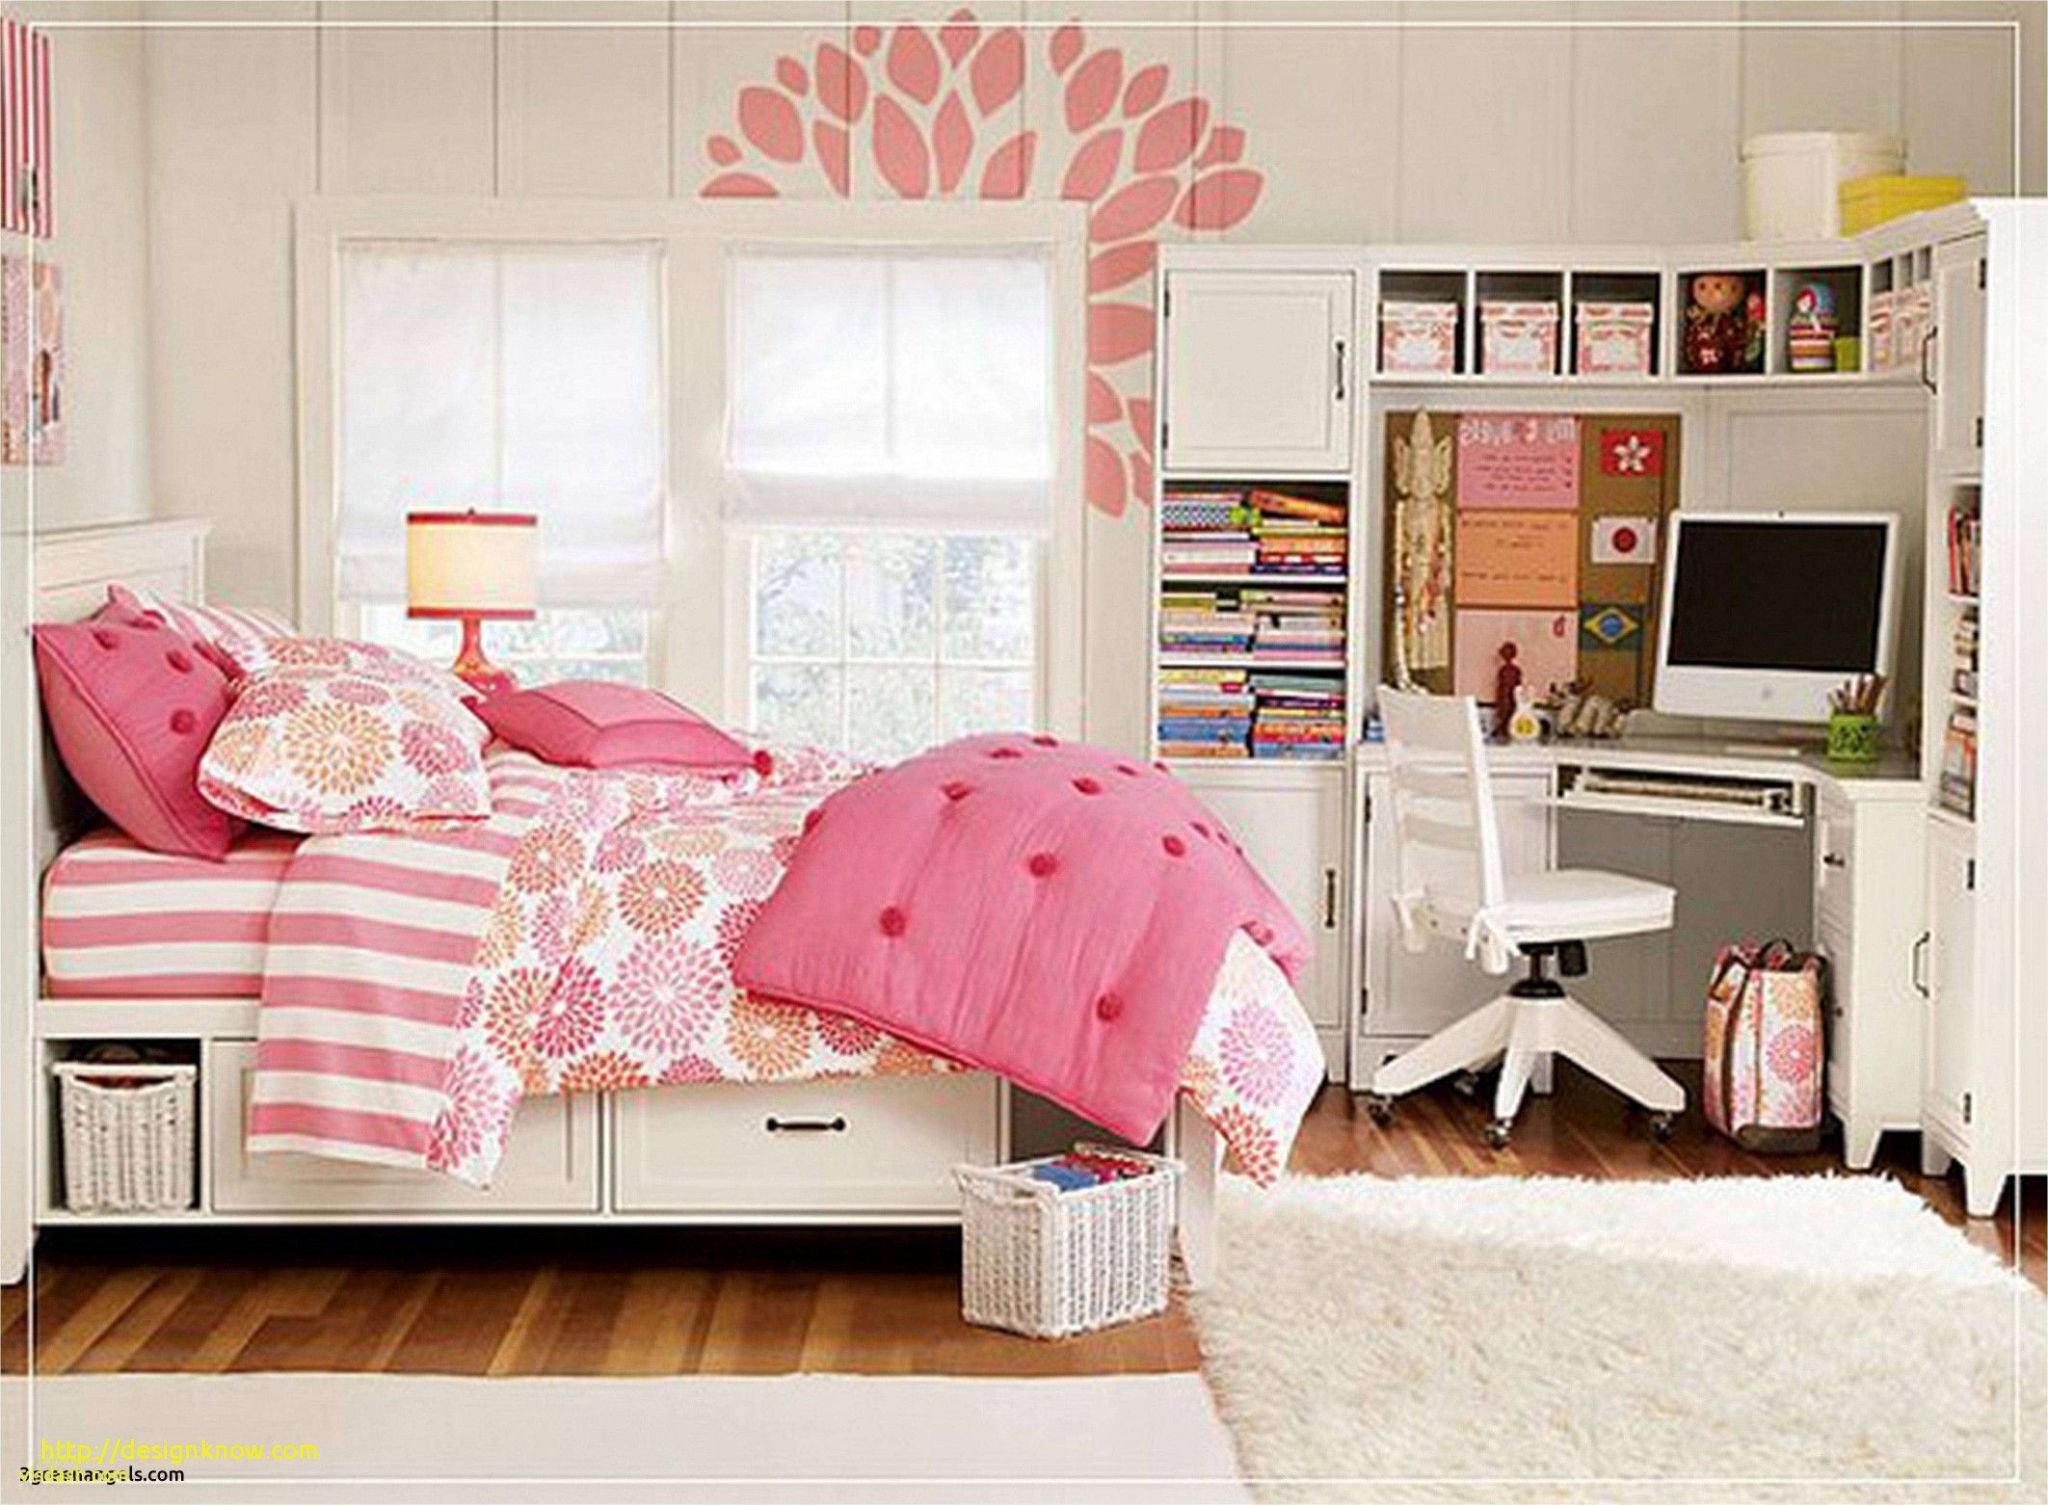 King Size Bedroom Ideas Awesome Unique Interior Design for Small Size Bedroom